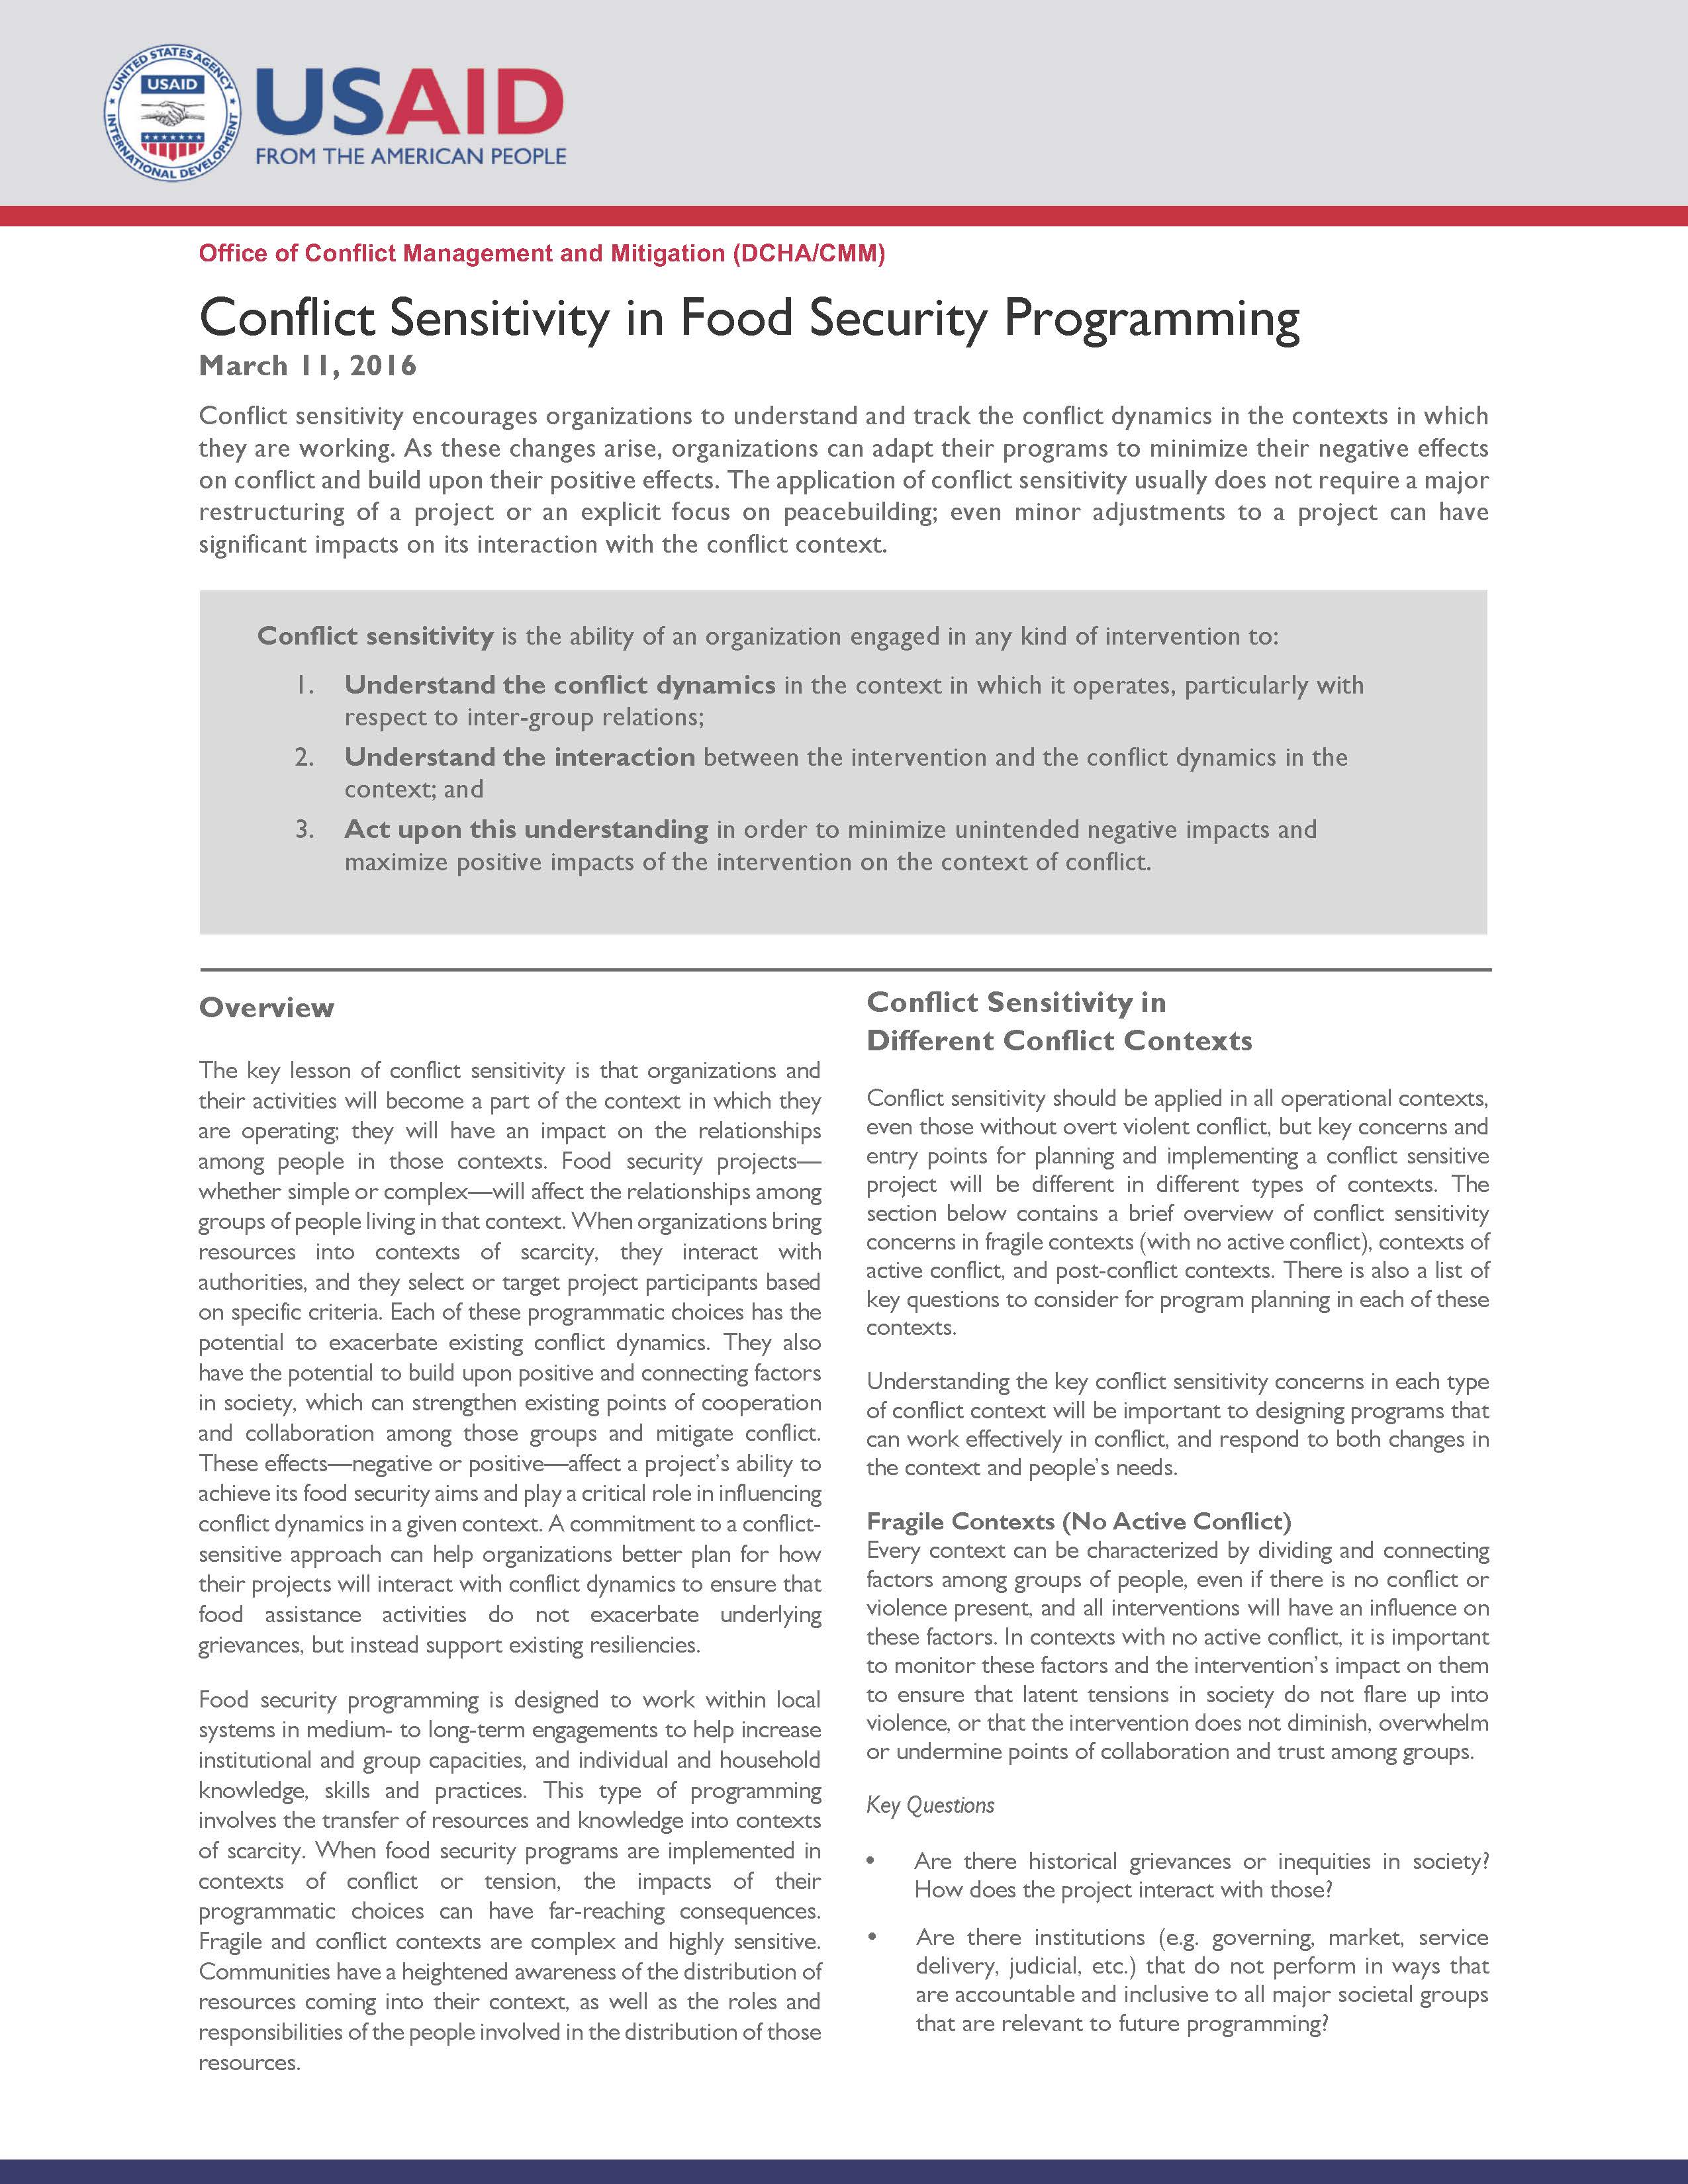 Conflict Sensitivity in Food Security Programming